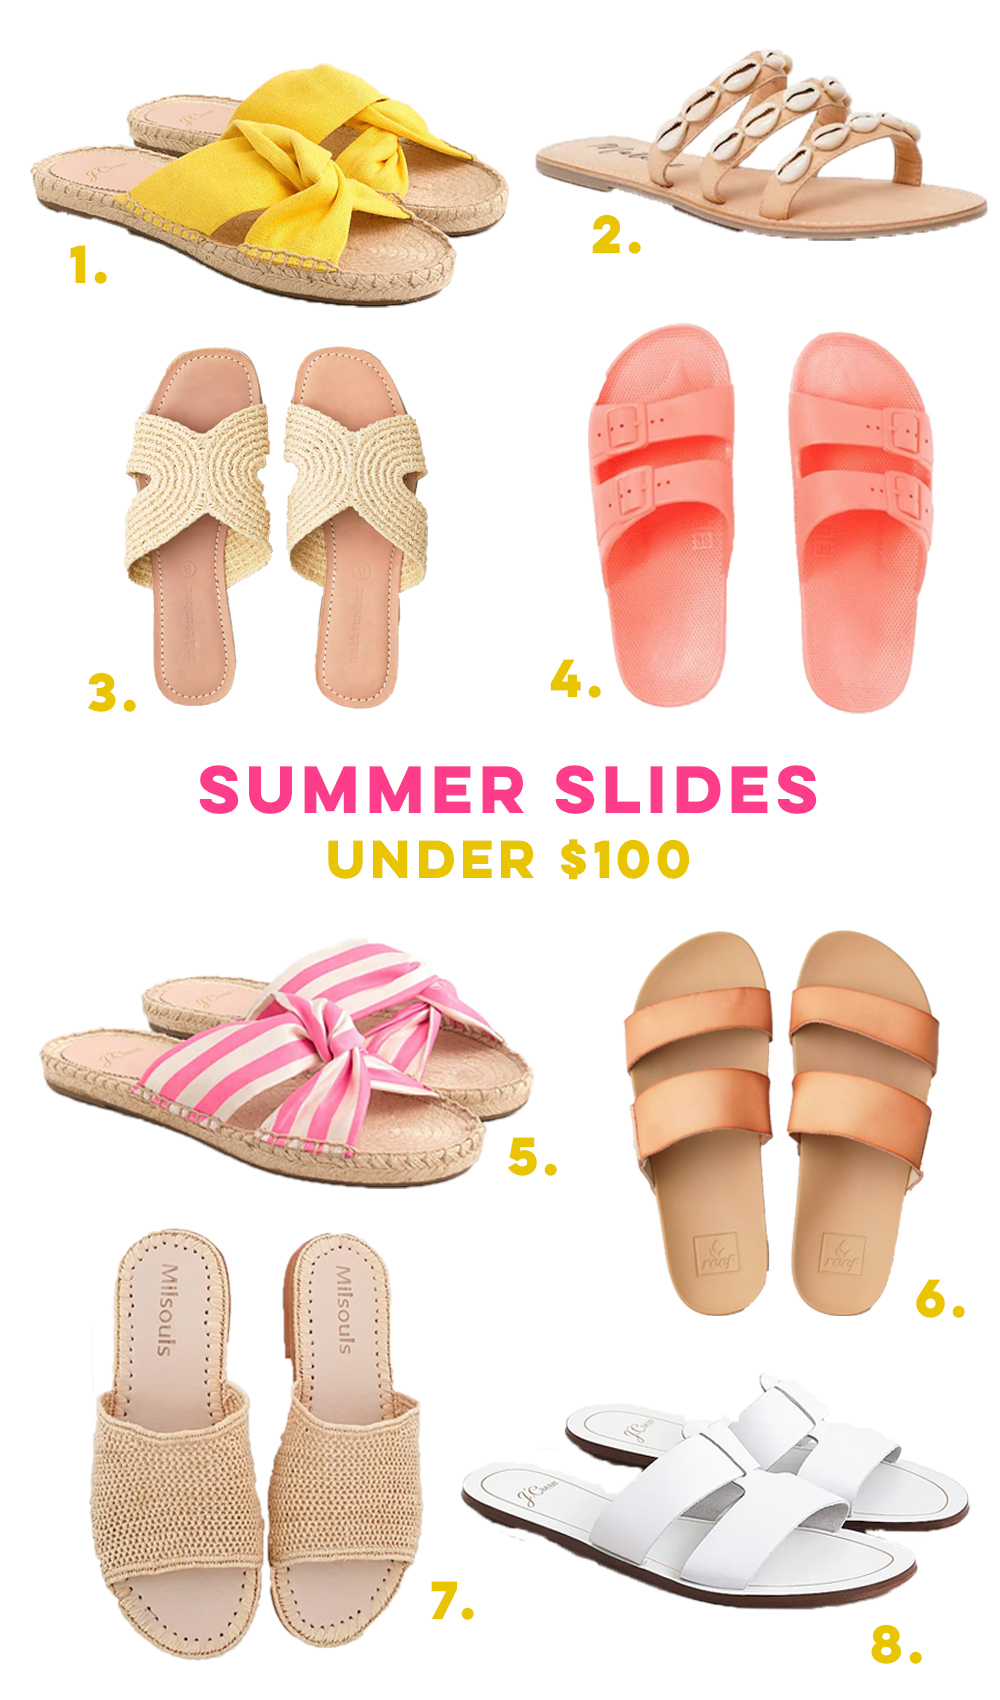 Summer Sandals Under $100 / How to Style Sandals for Summer / What to Wear with Dresses during Summer / Warm Weather Style Inspiration / How to Wear Sandals with Shorts - Sunshine Style, A Florida Based Fashion and Lifestyle blog by Katie McCarty